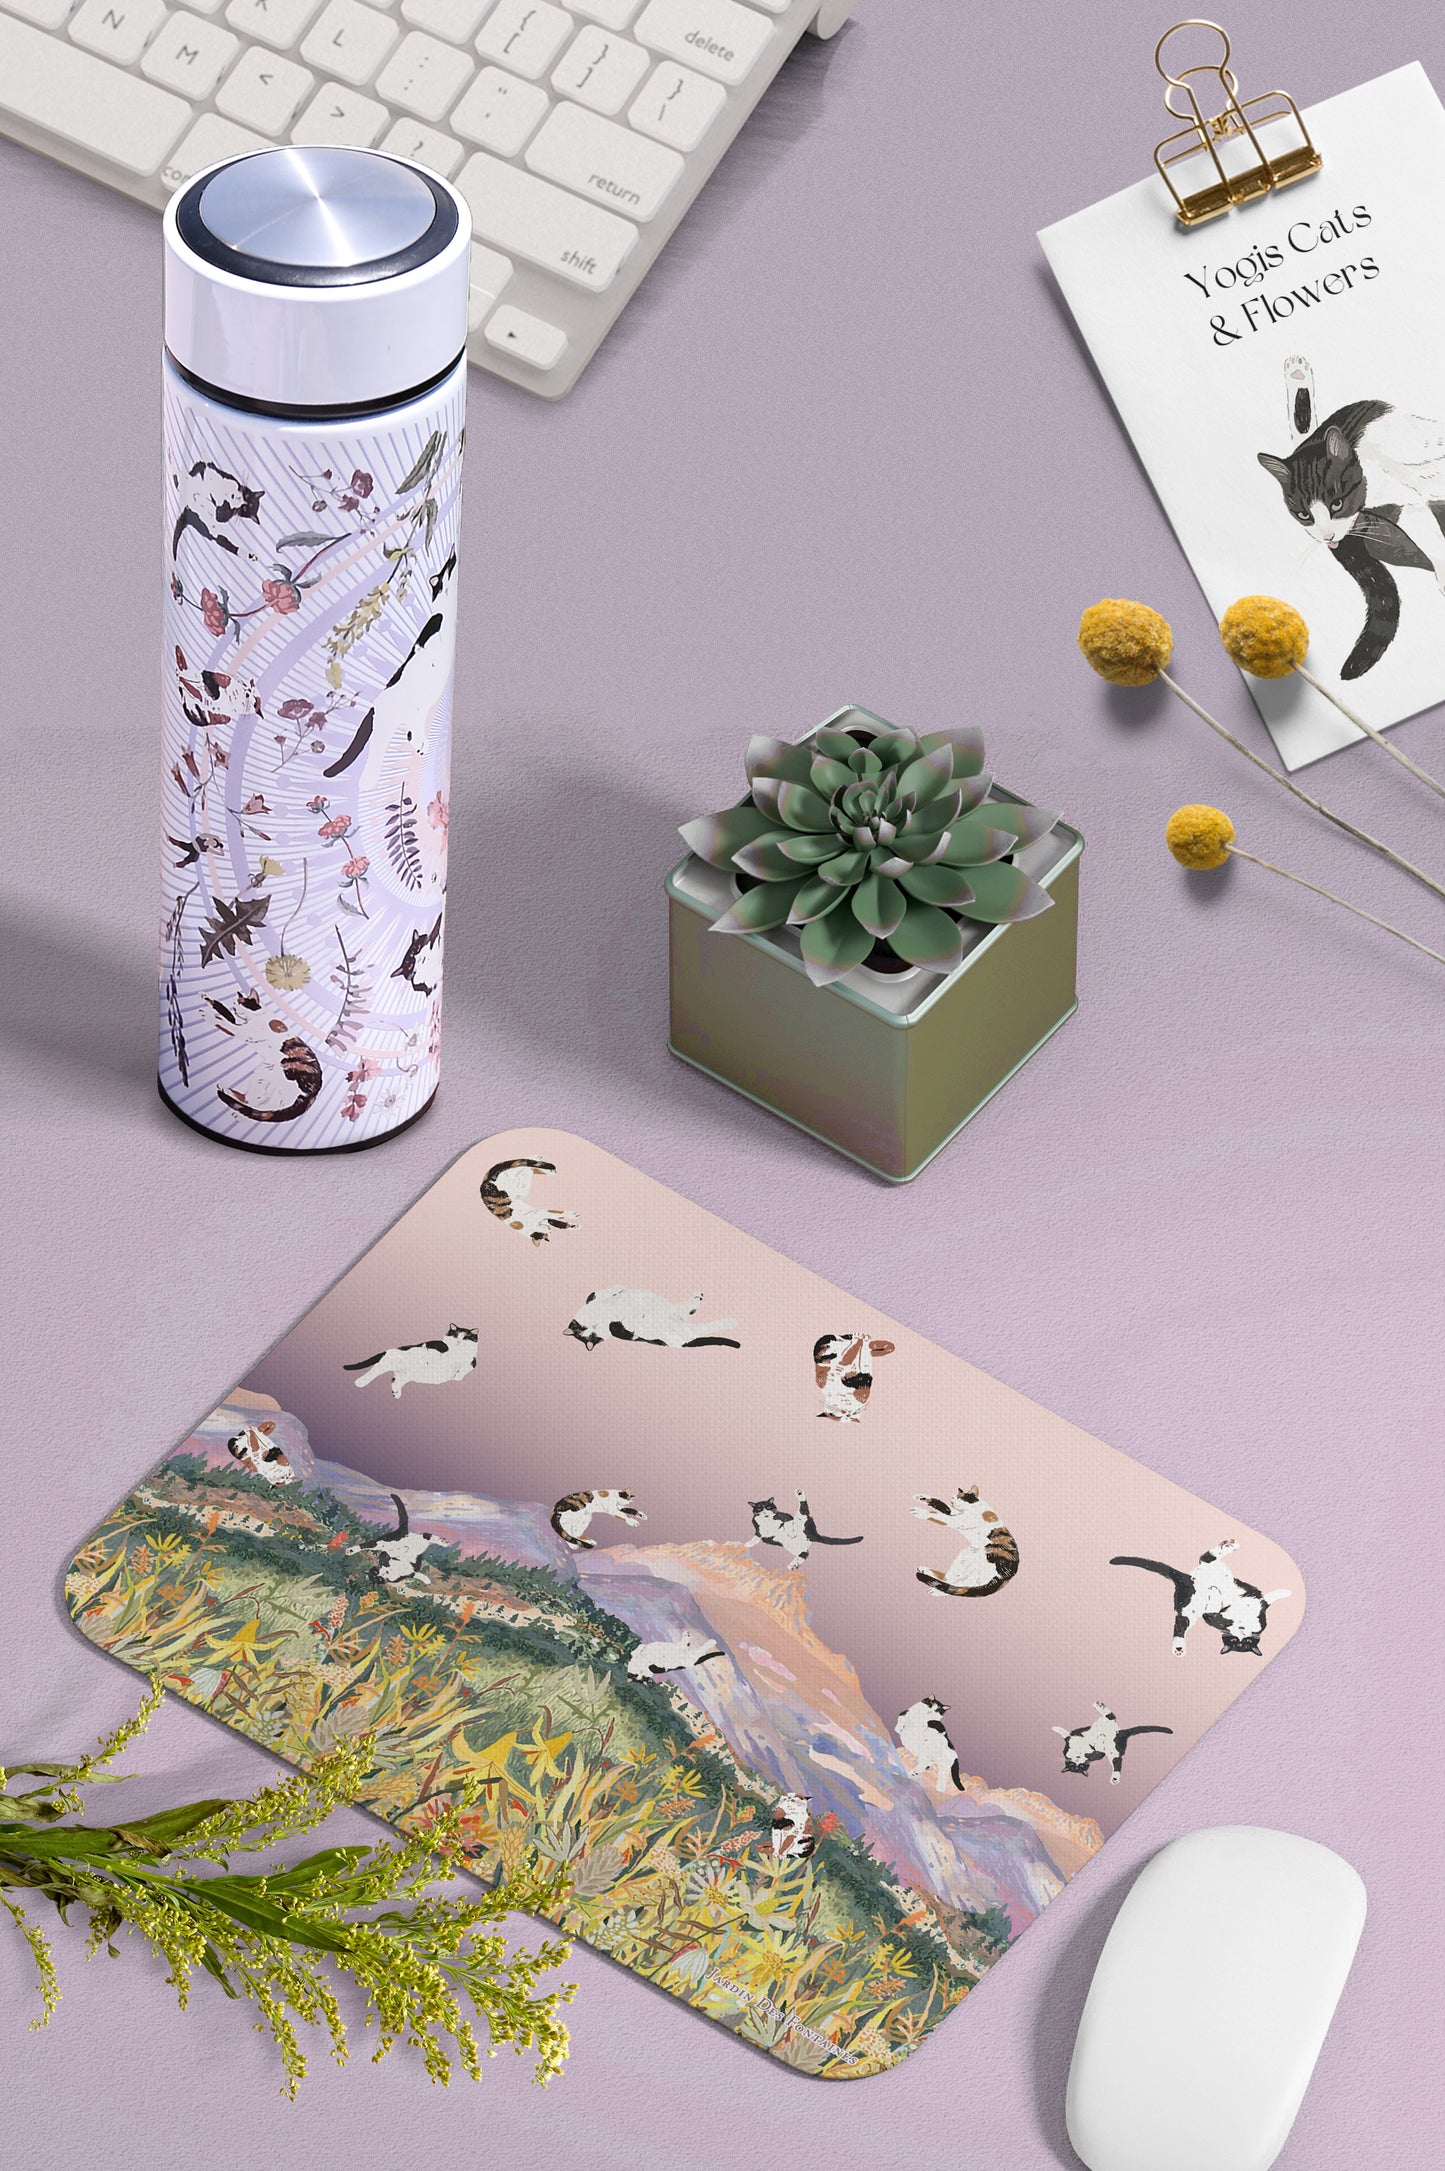 "Yogis Cat and Flower" PU Leather Mouse Pad